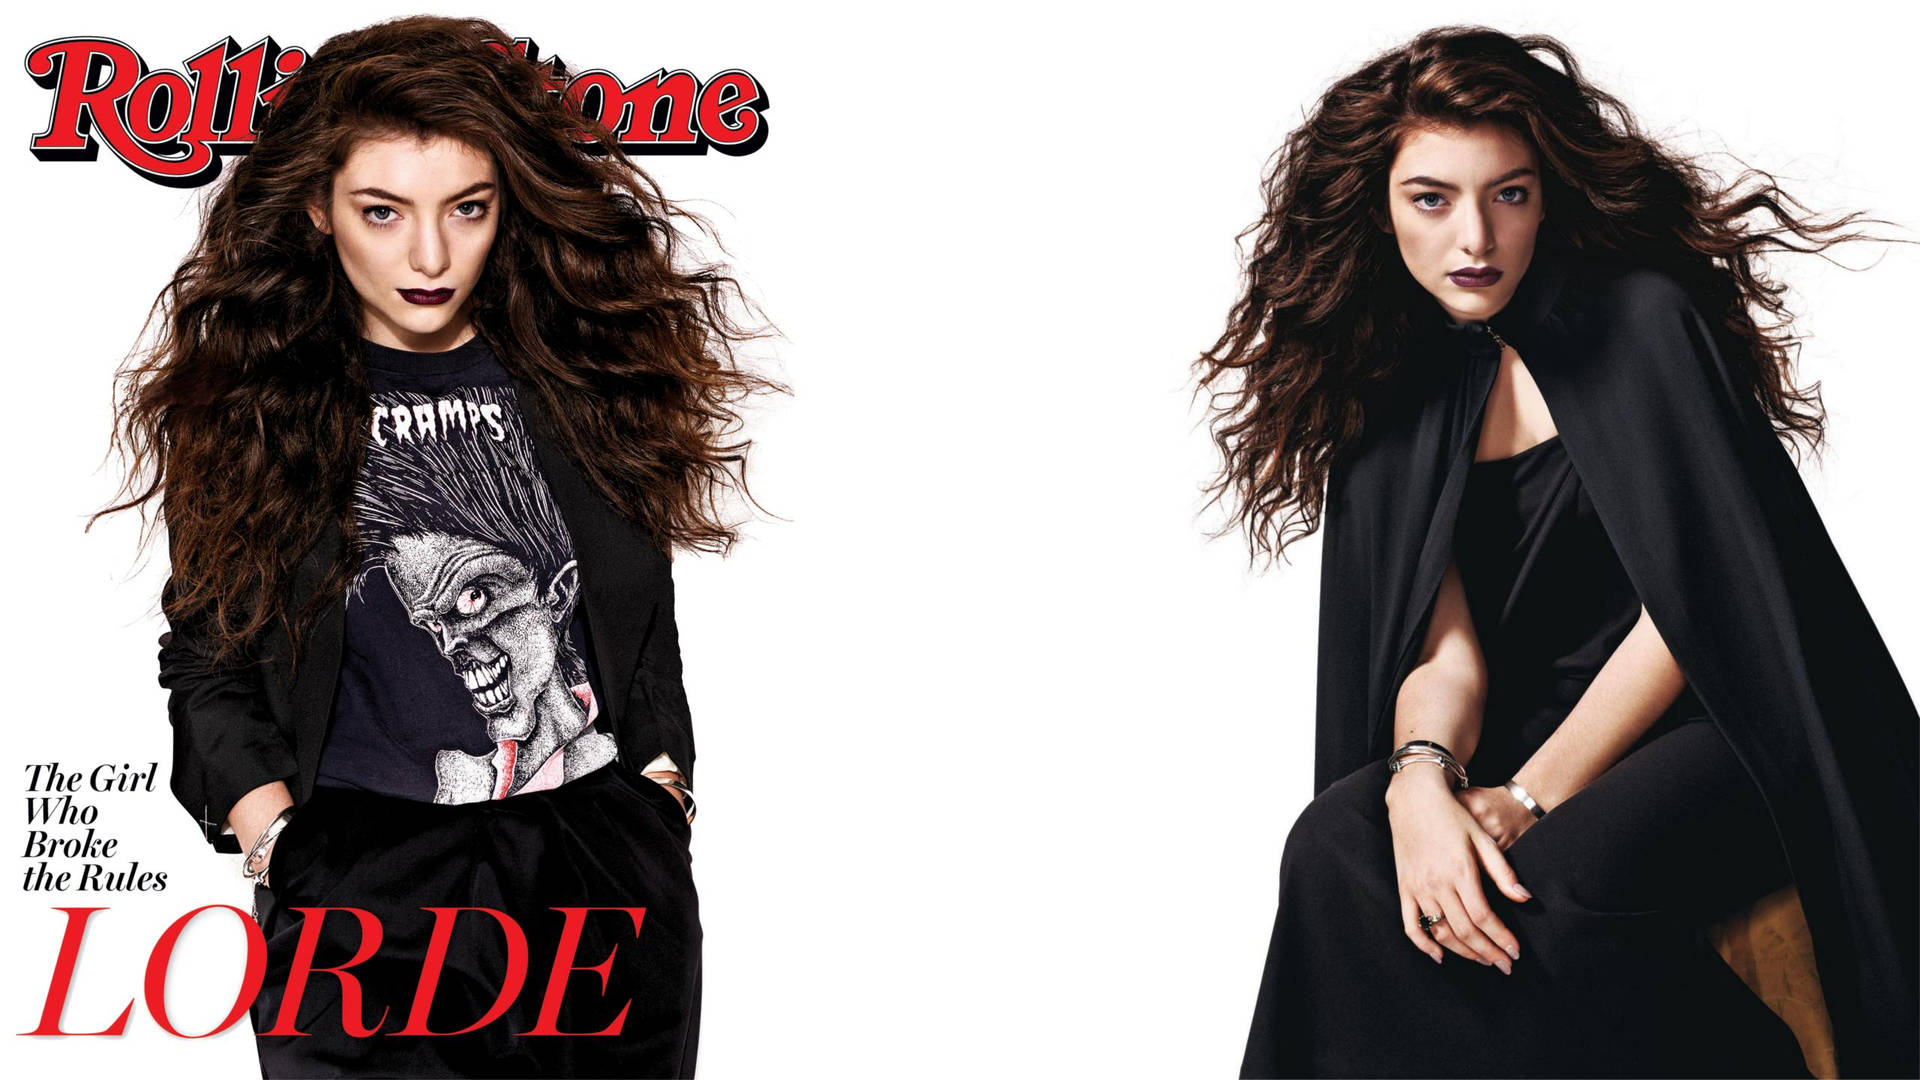 Dual Lorde Rolling Stone Shoot